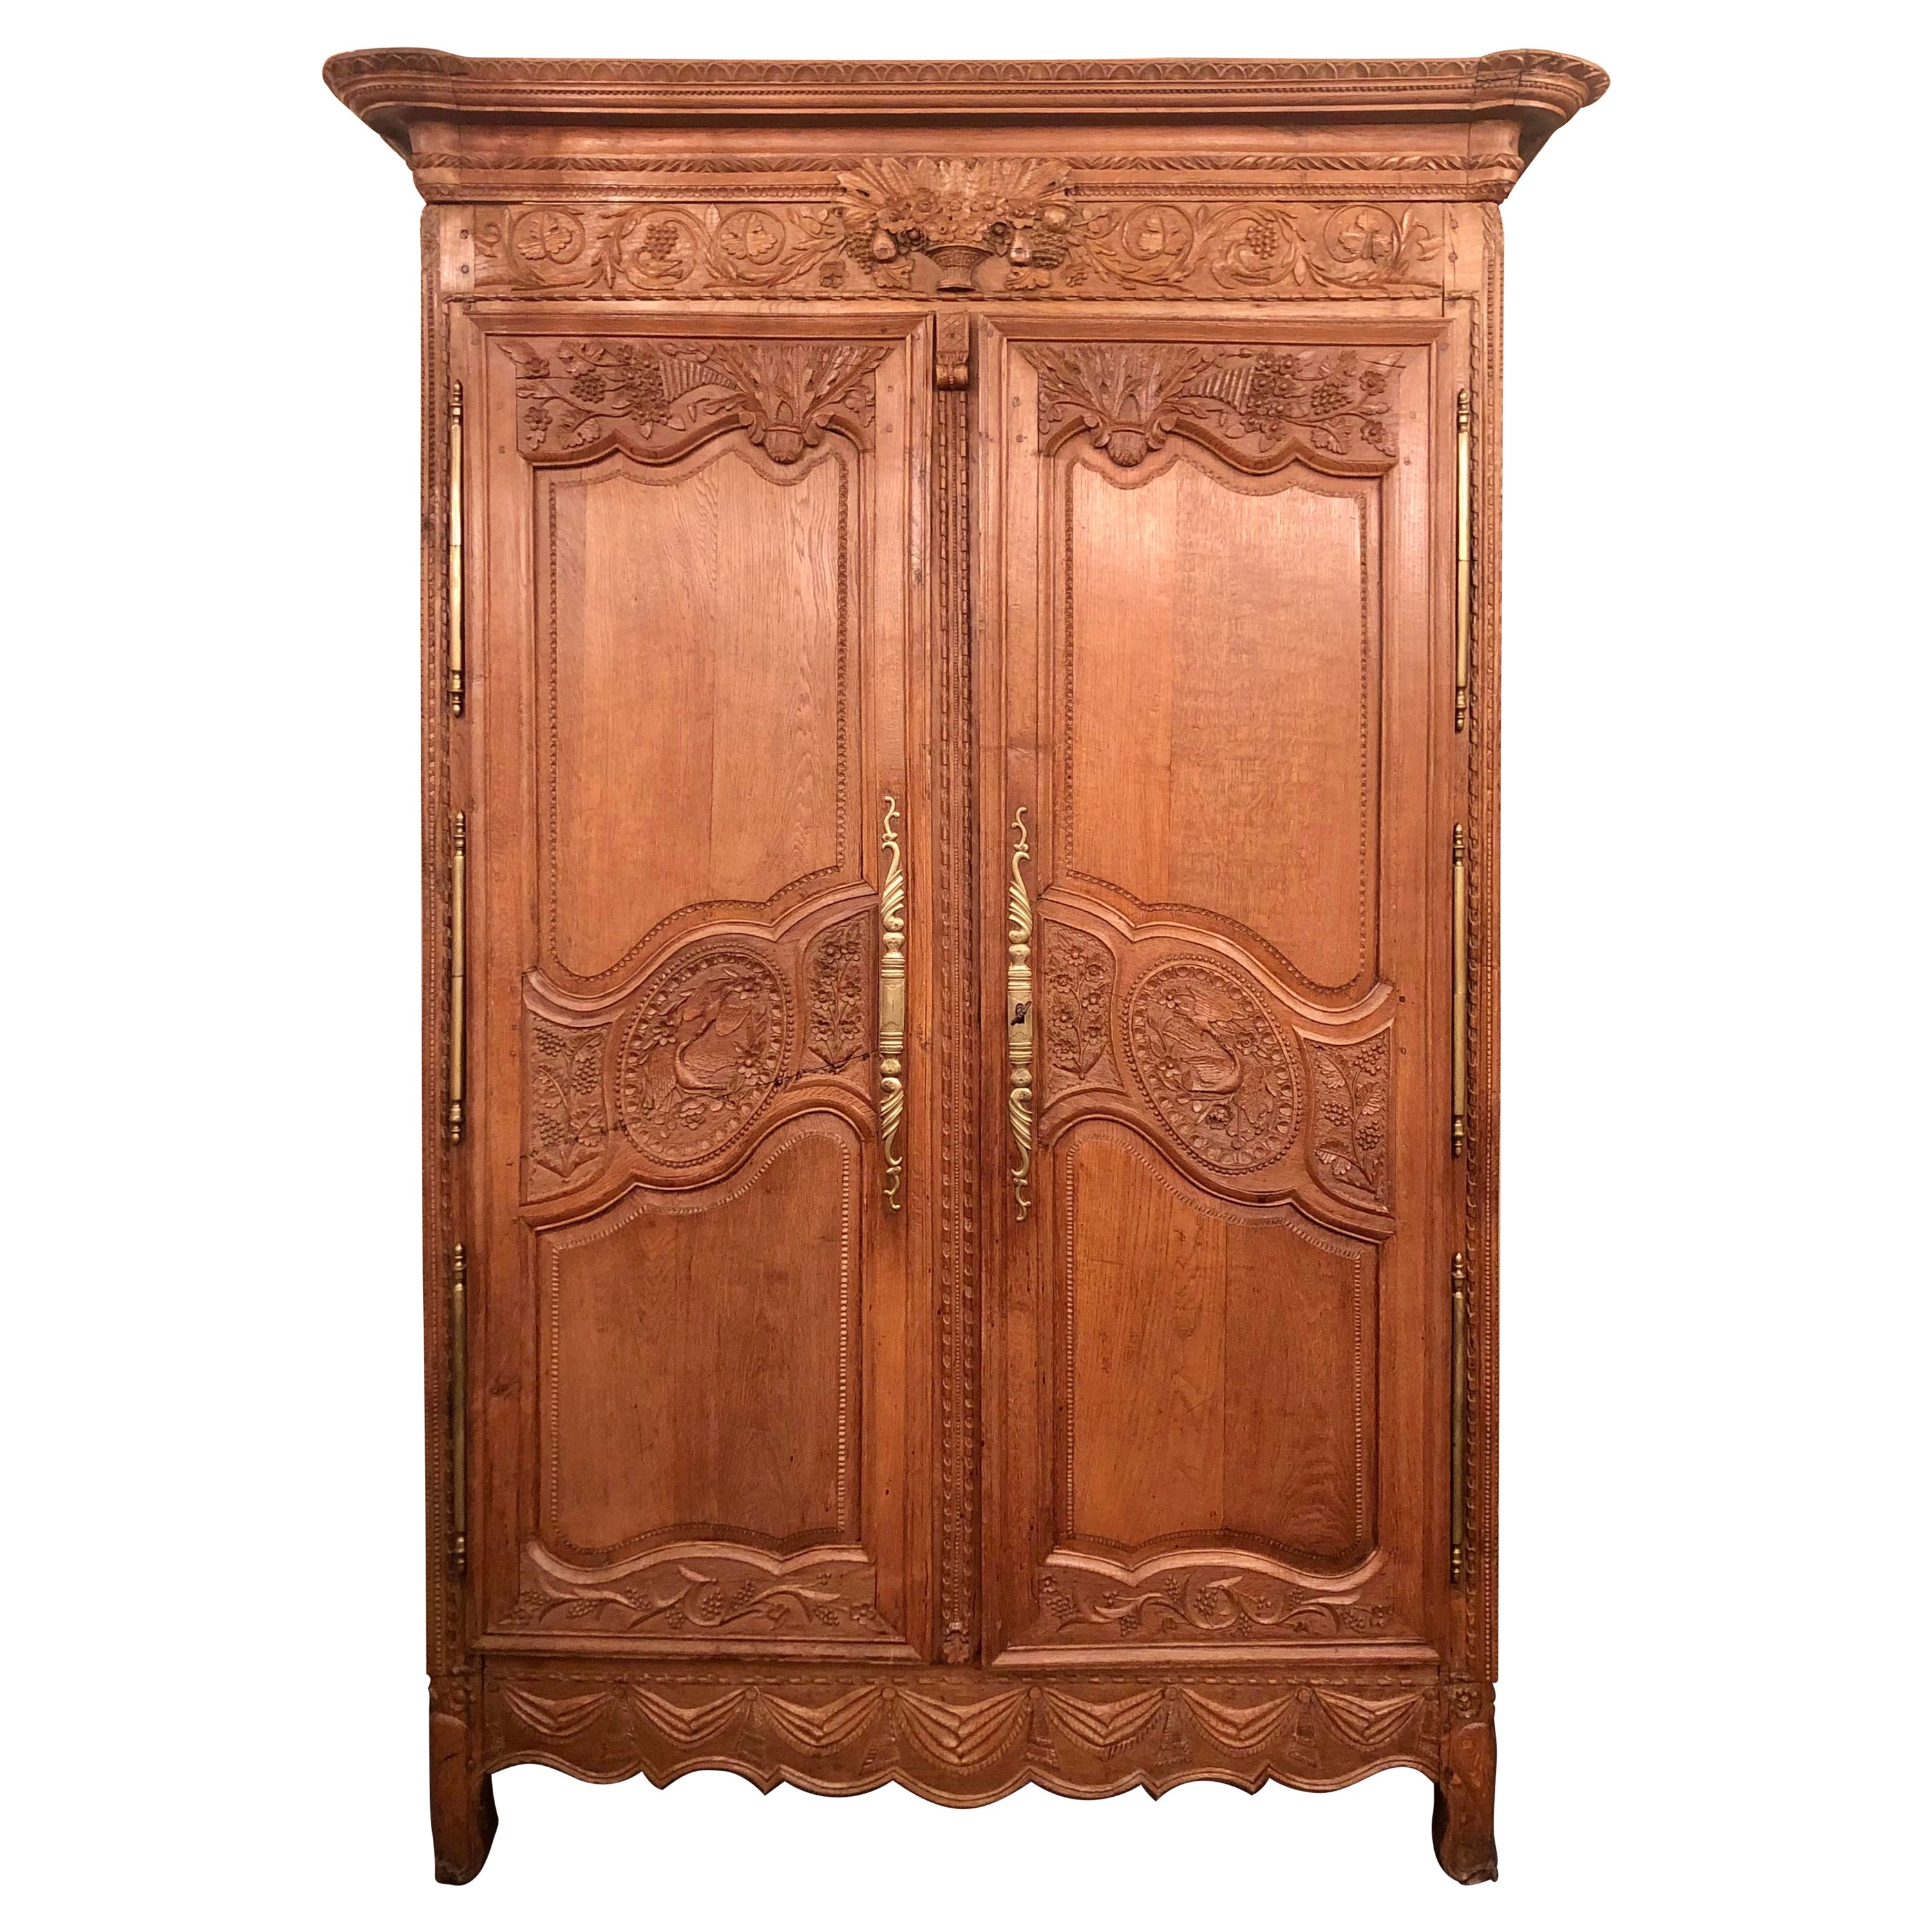 Antique French Provincial Carved Elm Armoire, Original Brass Hardware, Ca. 1890s